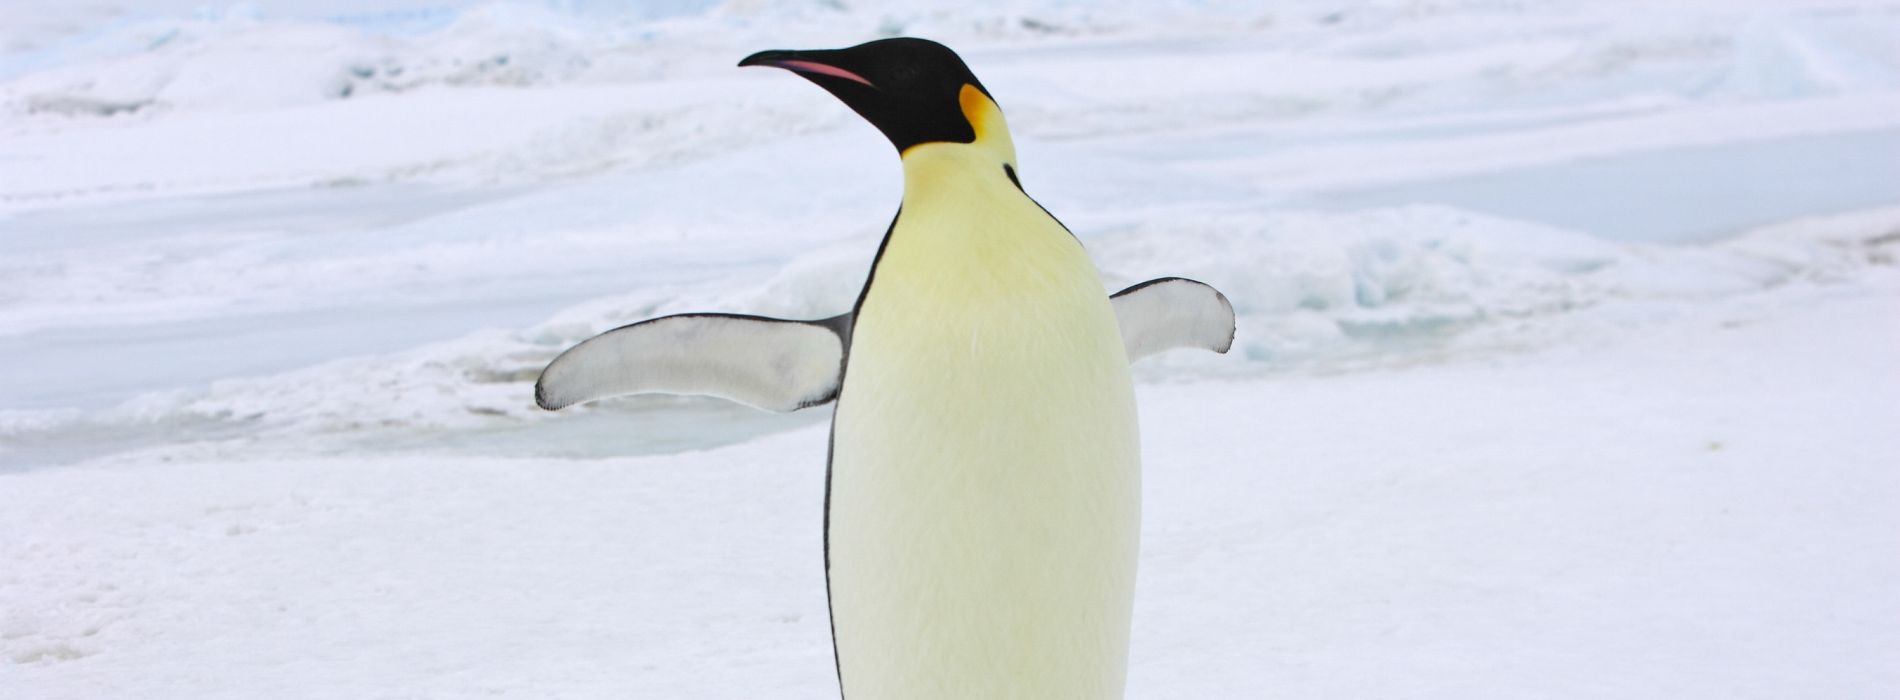 What is the tallest penguin?